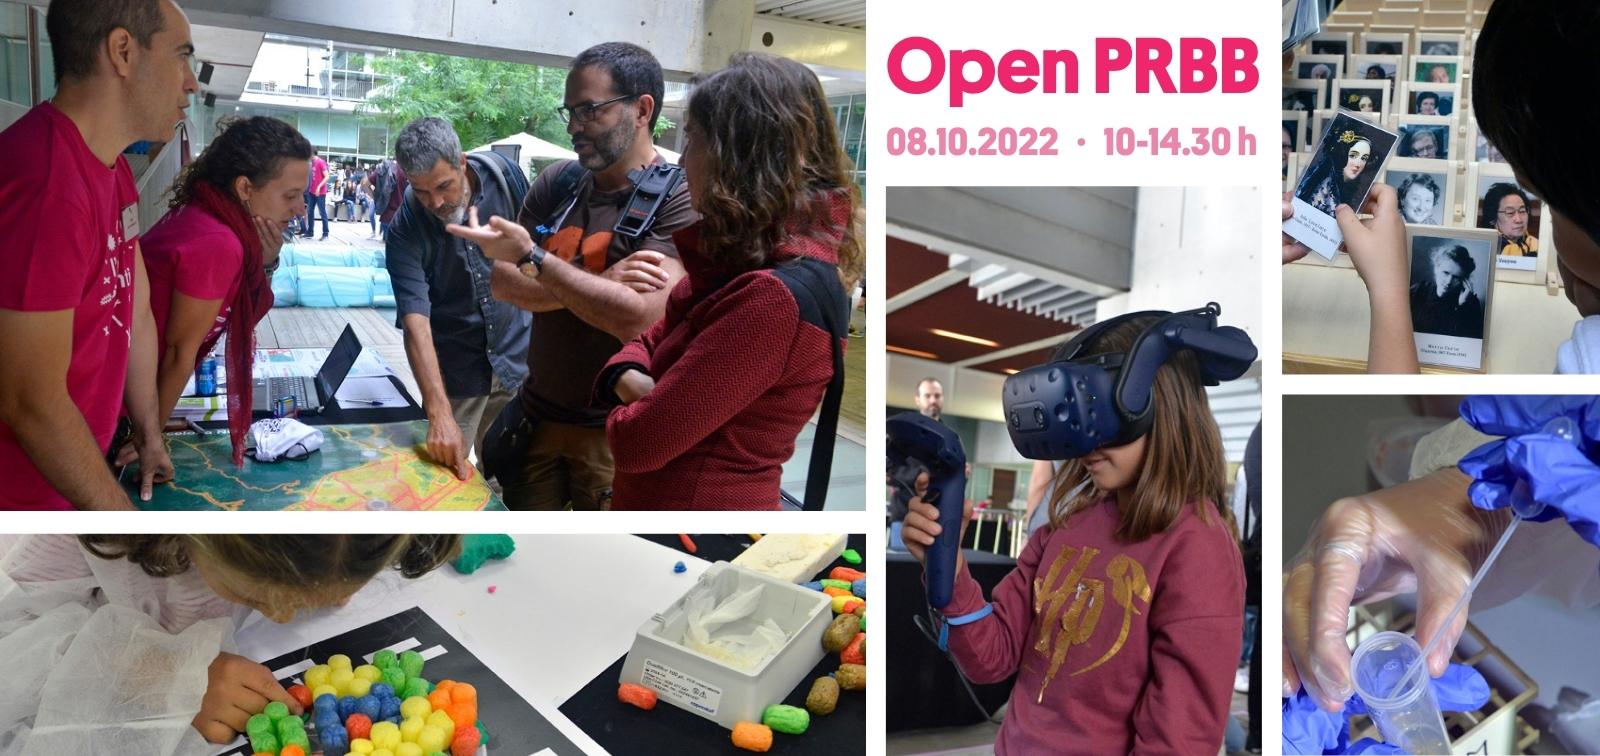 Some outreach activities at the PRBB Open Day, Barcelona.